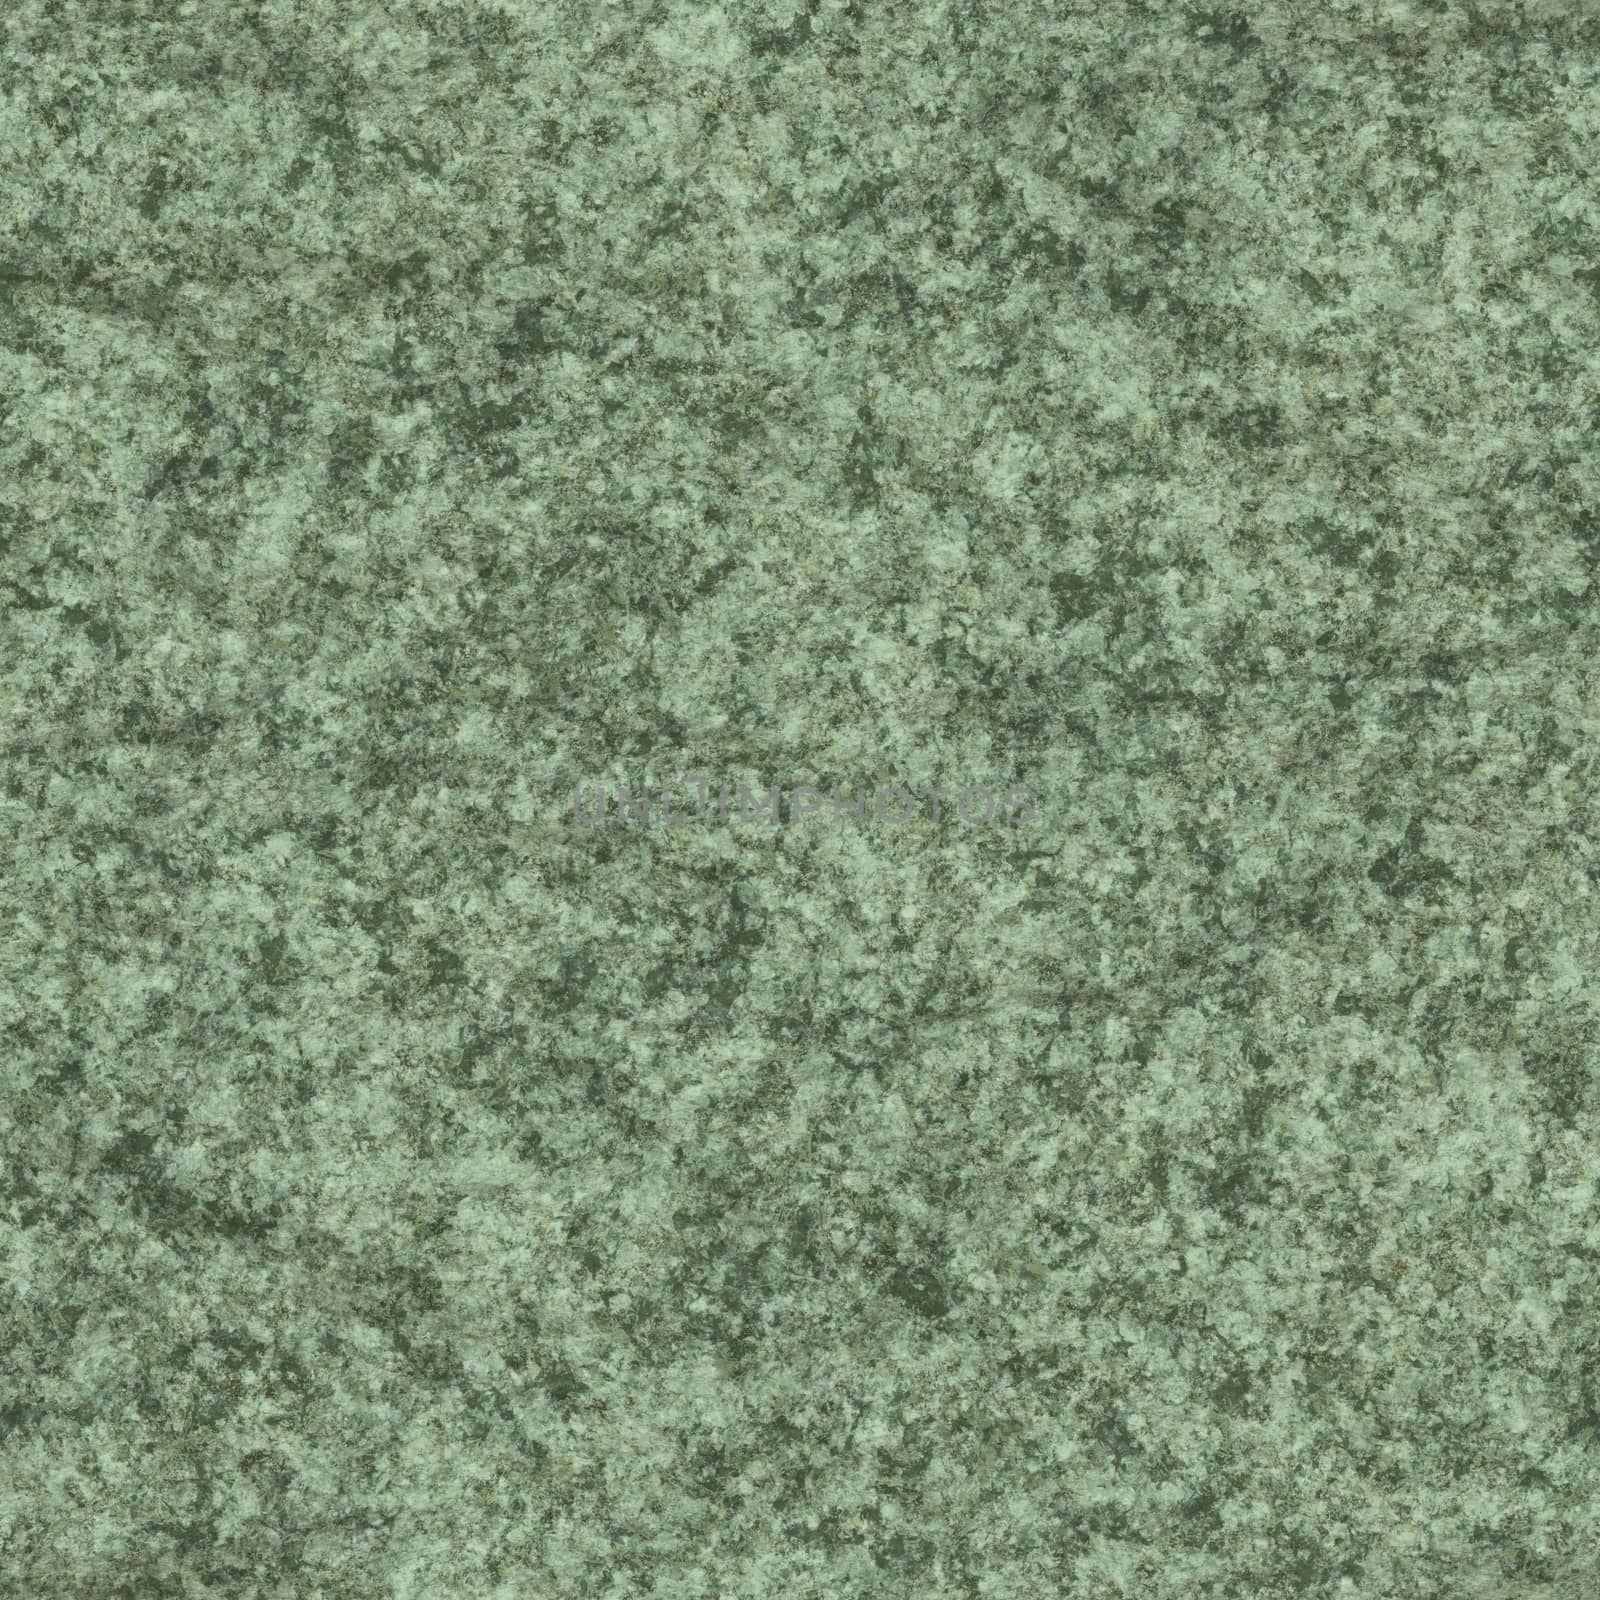 An illustration of a seamless typical green granite texture background